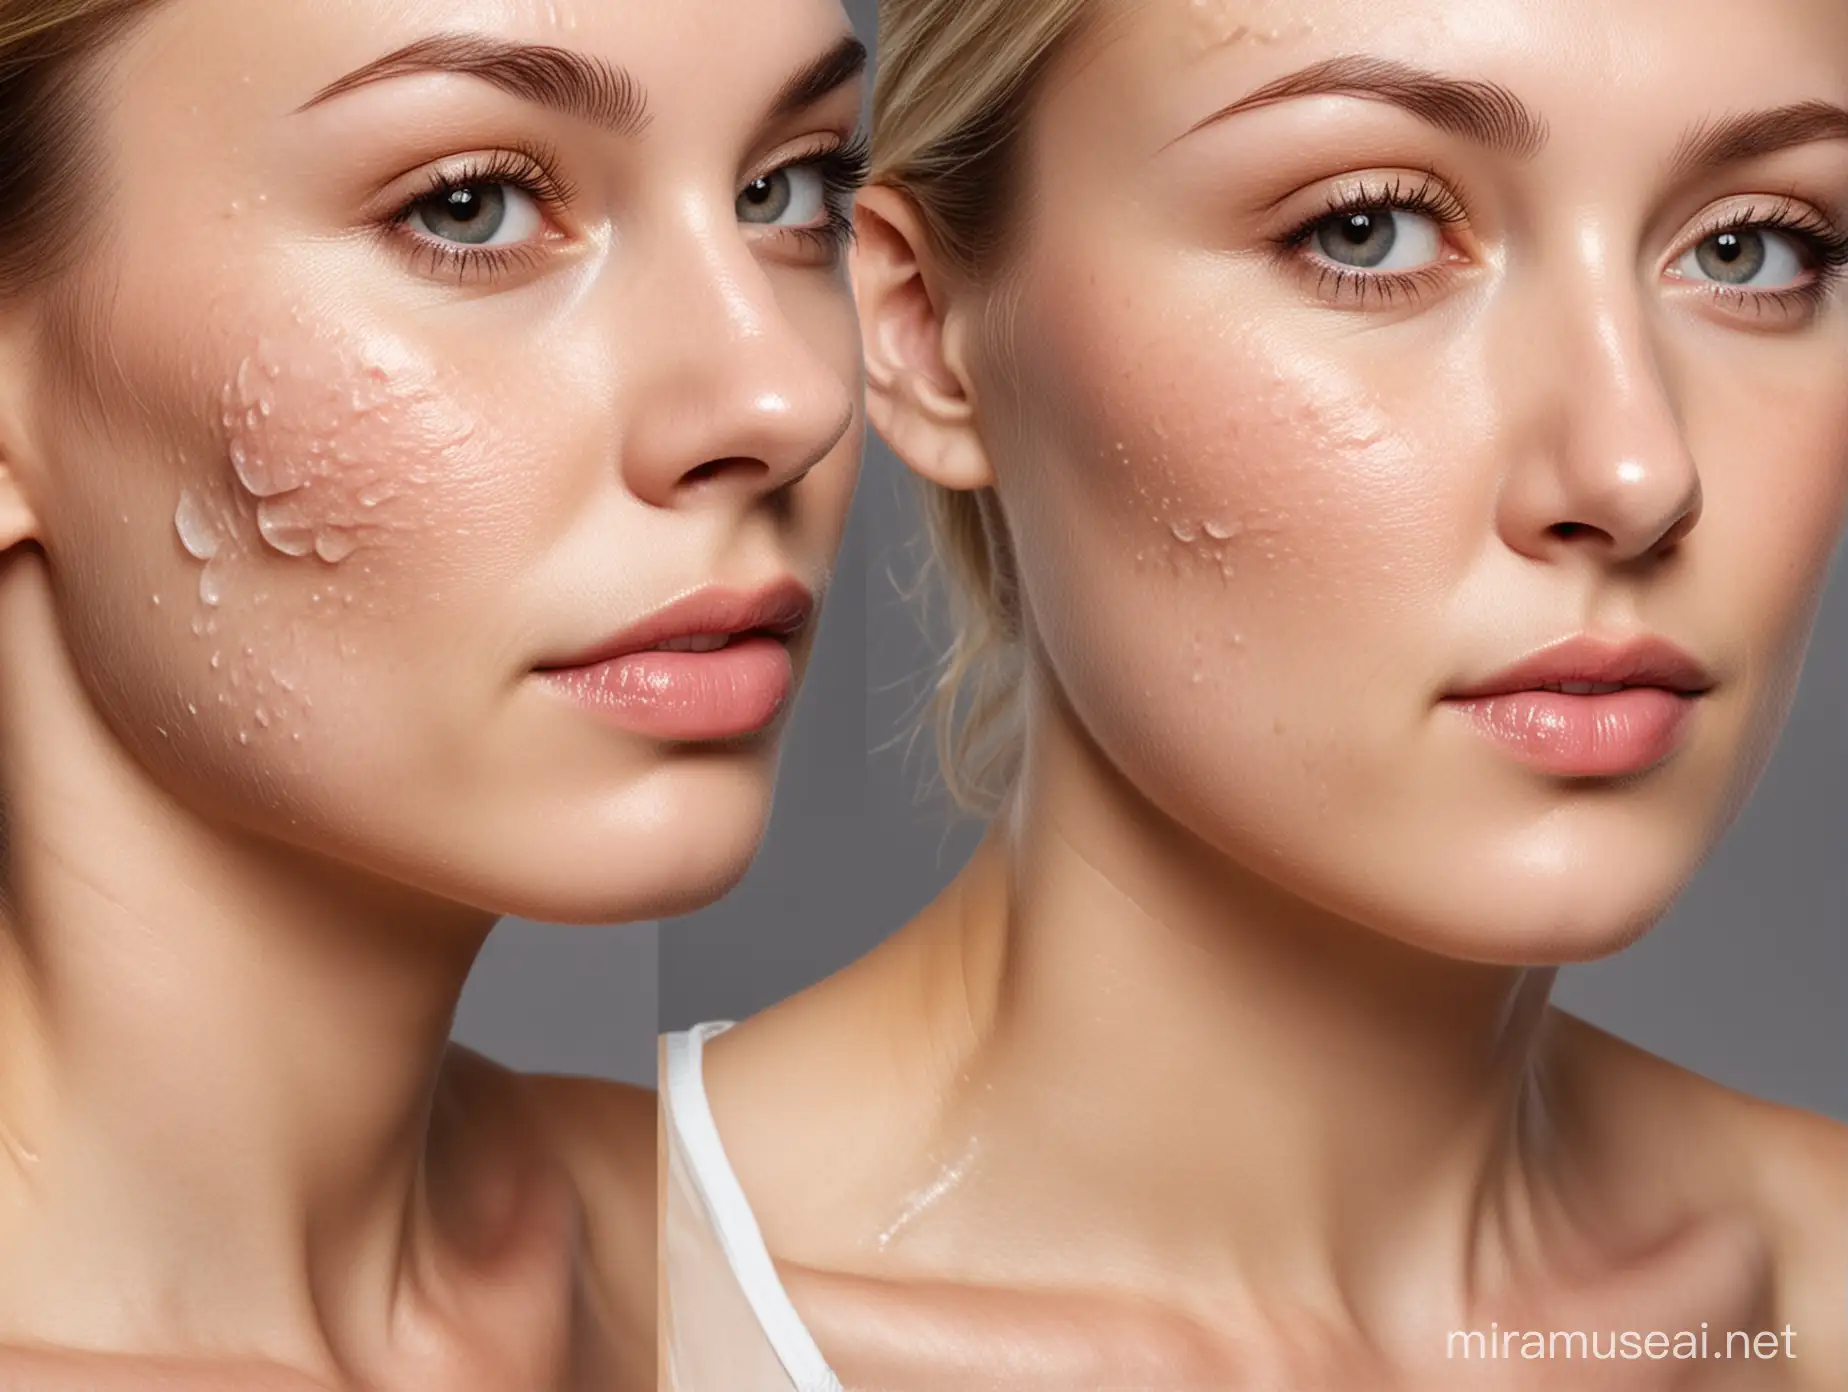 Youthful Hydrated Skin vs Dry Mature Skin A Visual Comparison